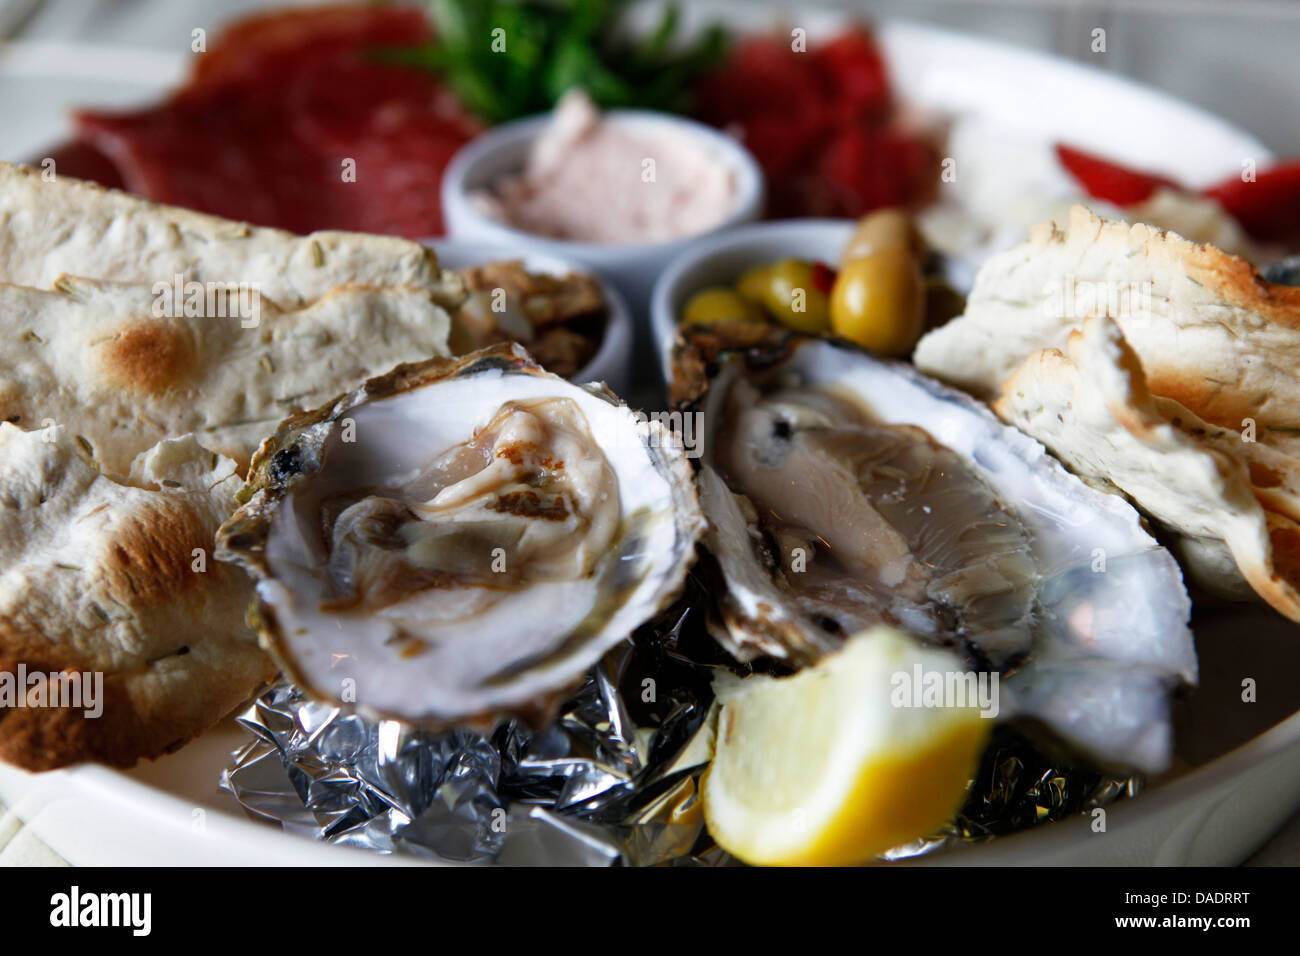 A platter of regional oyster, seafood and meat is served in Antwerp, Belgium. Stock Photo